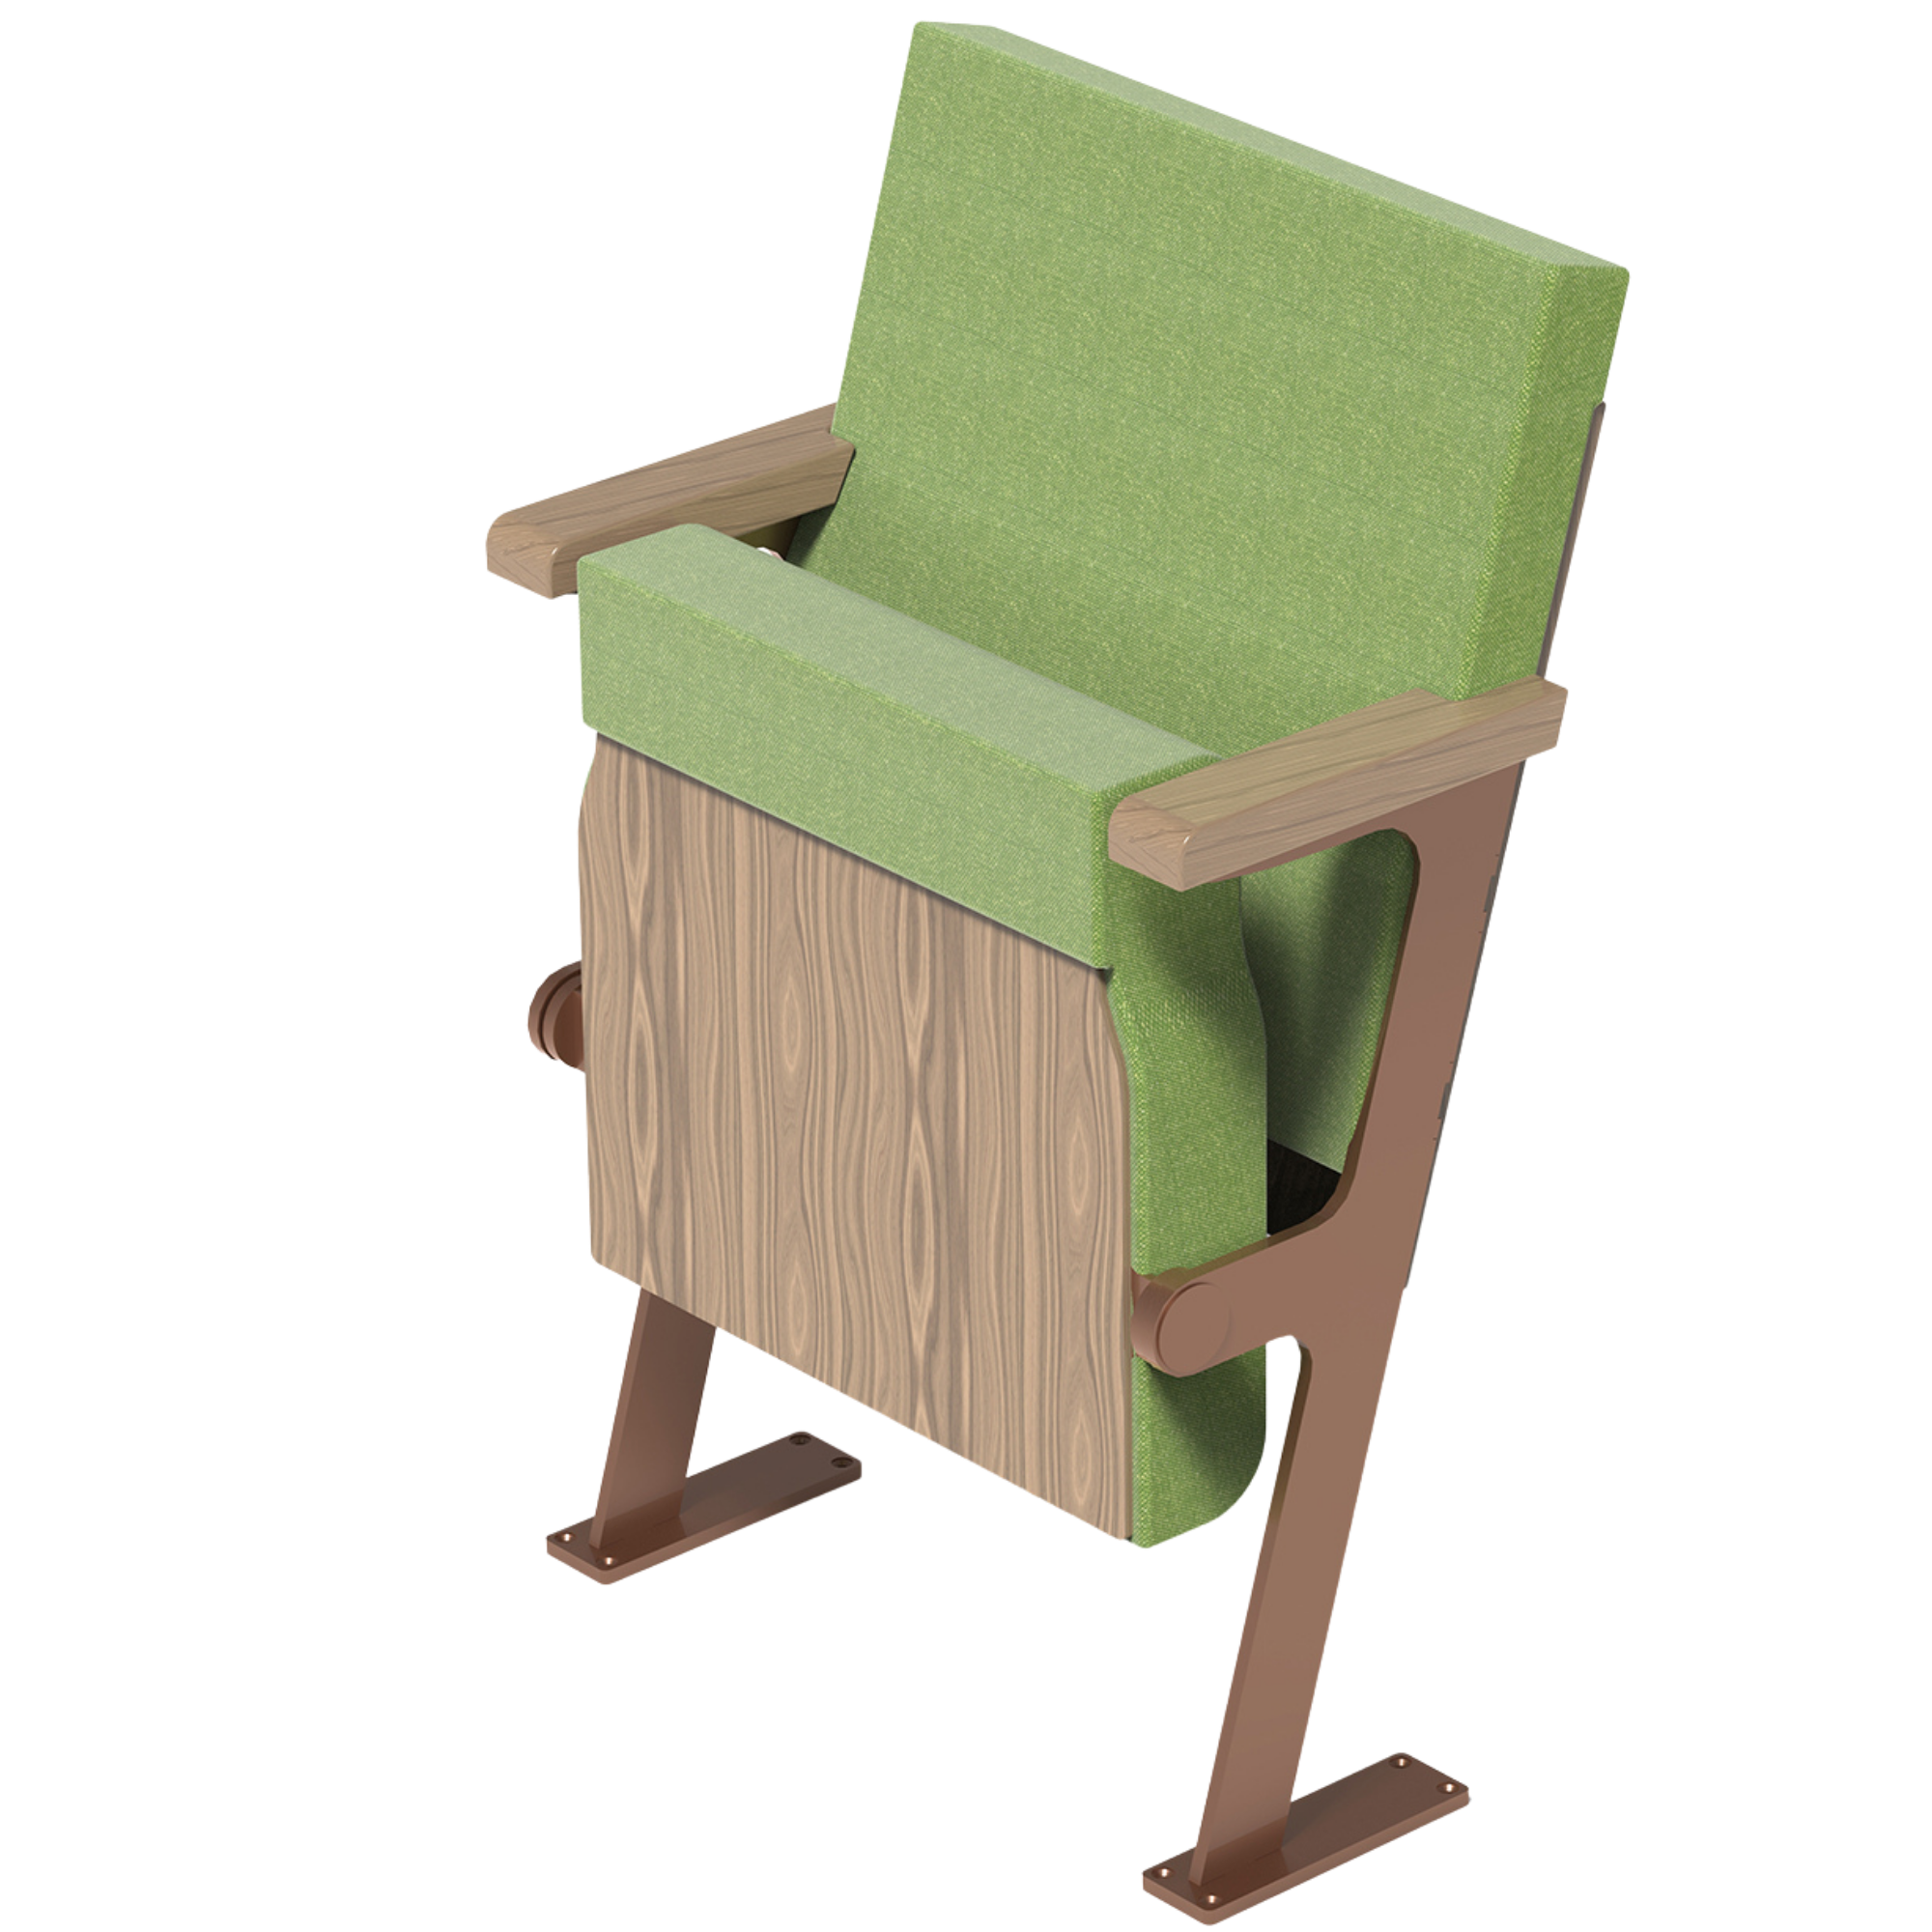 A green upholstered tip up chair with a wooden frame.